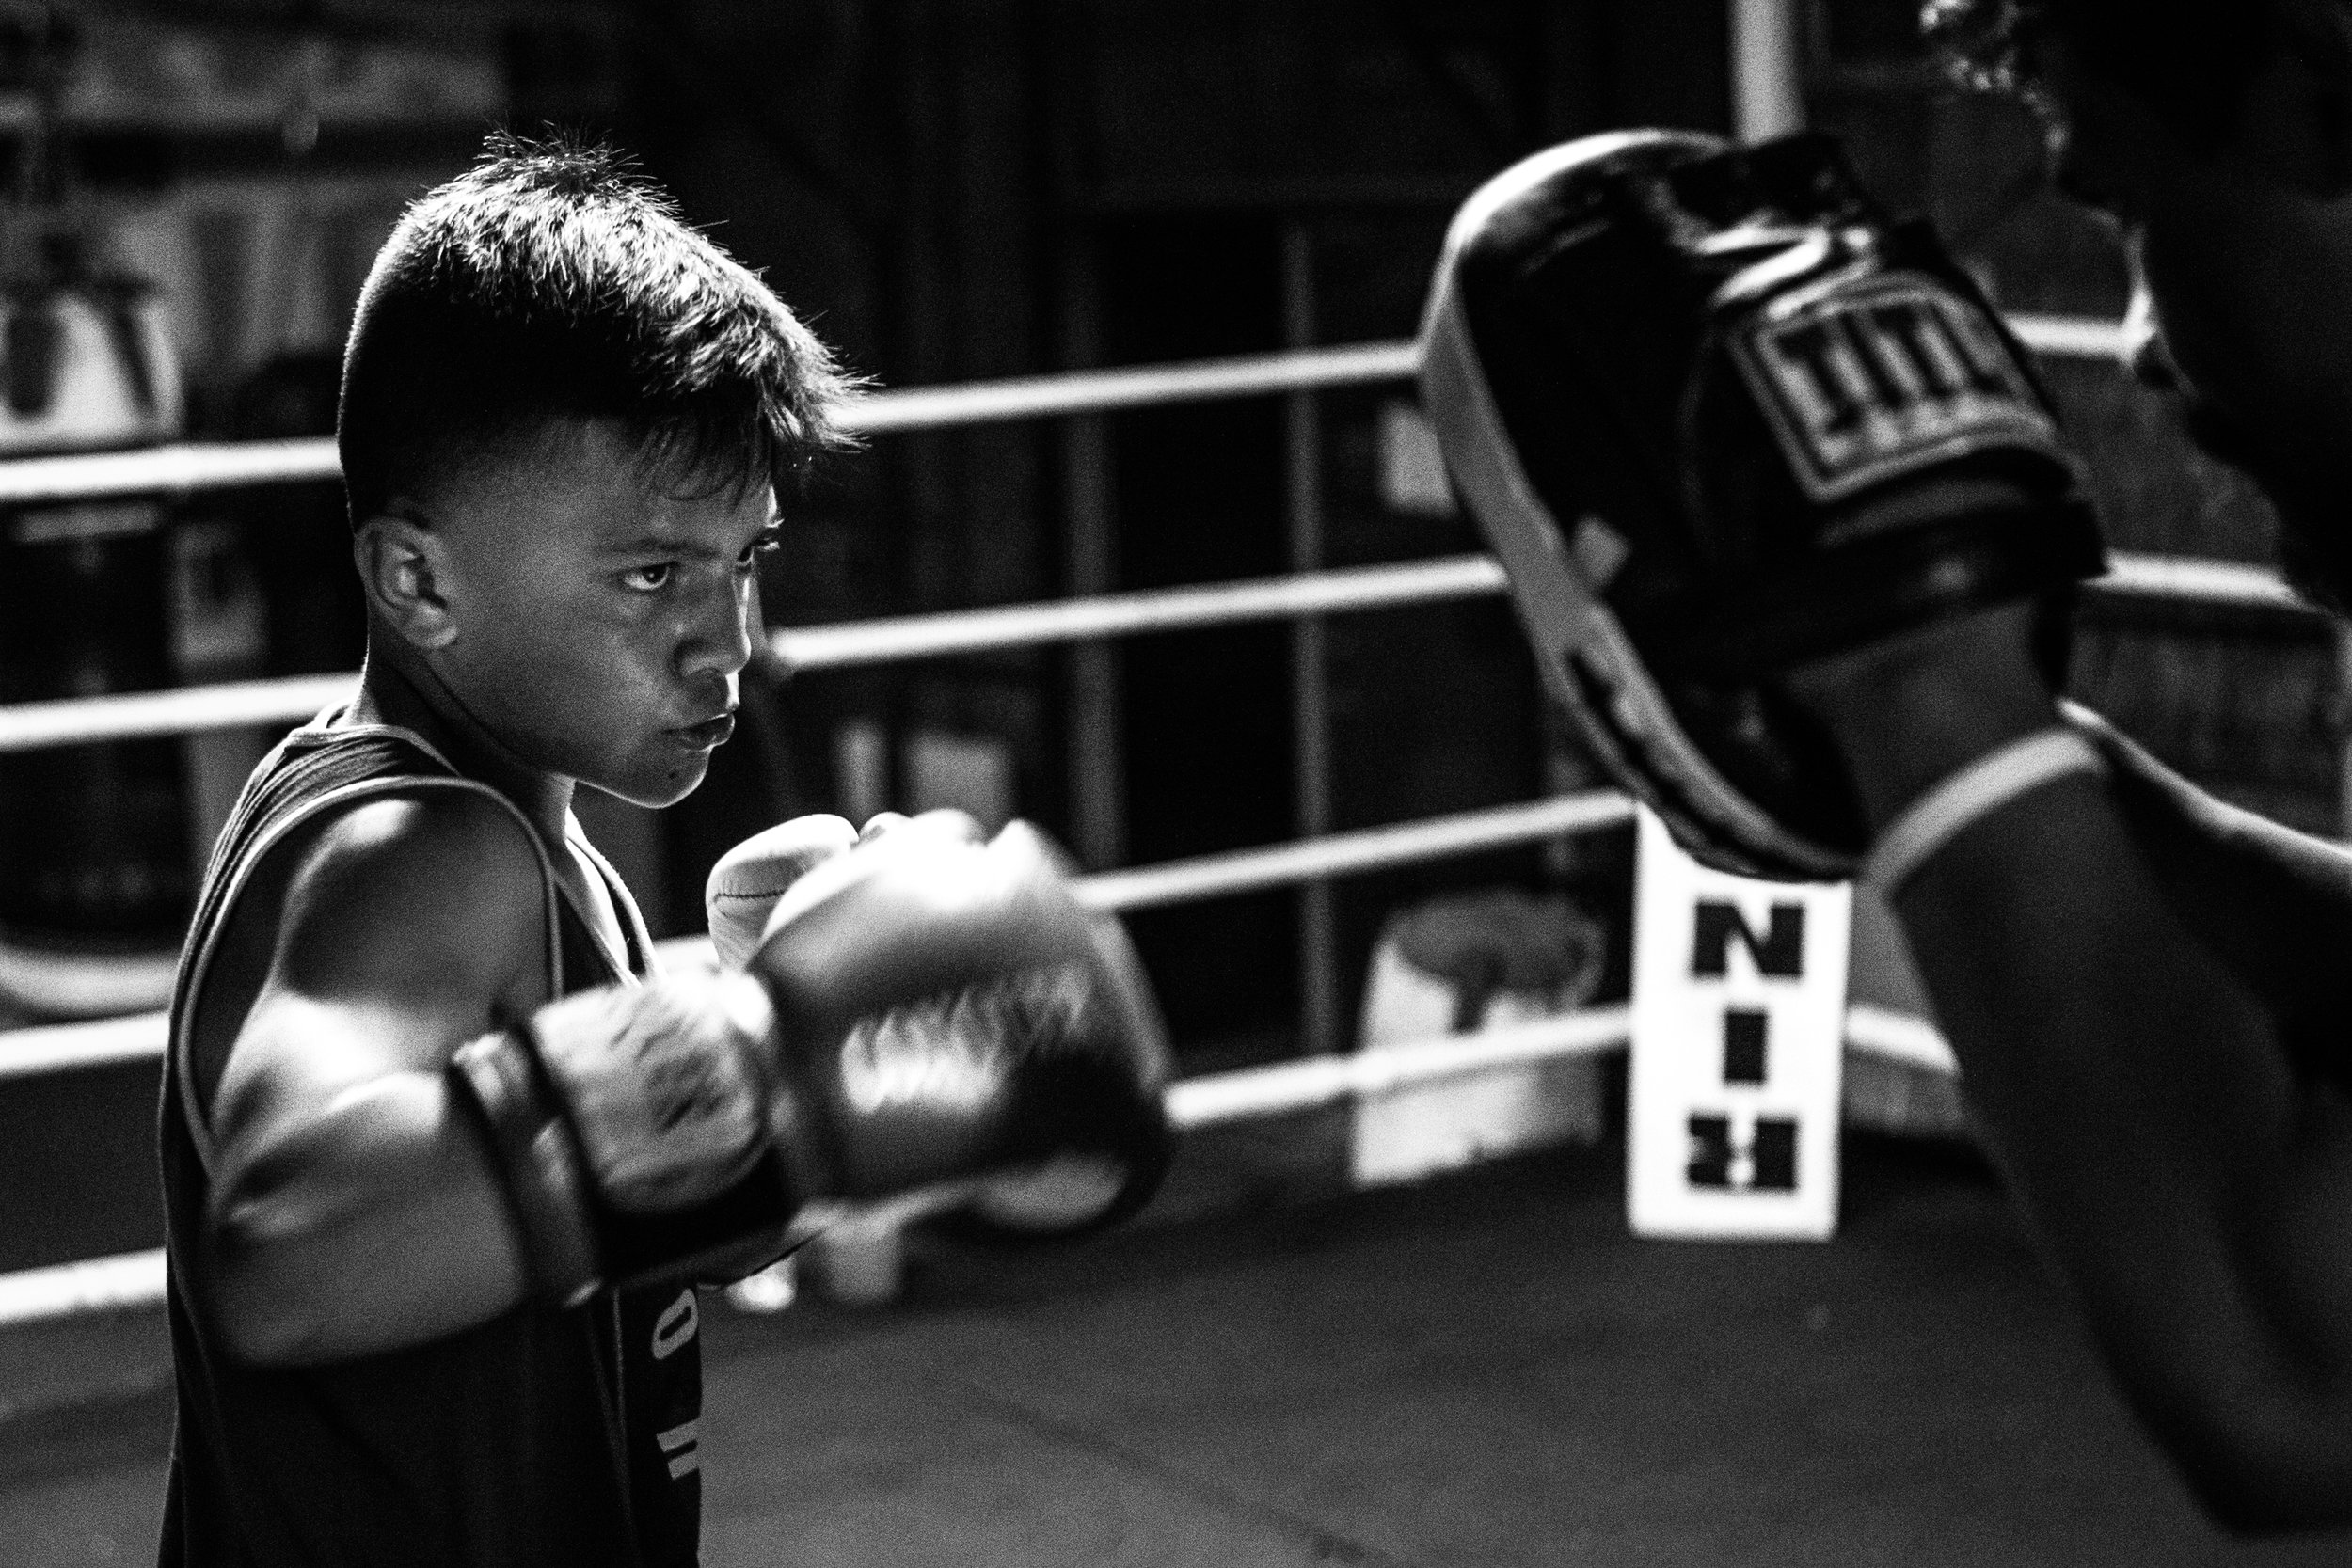  After the day's training drills are complete, AJ Ramos, 13, &nbsp;goes through punching exercises with his father and owner of Ramos Boxing, Arturo Ramos III. The younger Ramos is currently ranked #5 in the nation for the 13- to 14-year-old,&nbsp;85